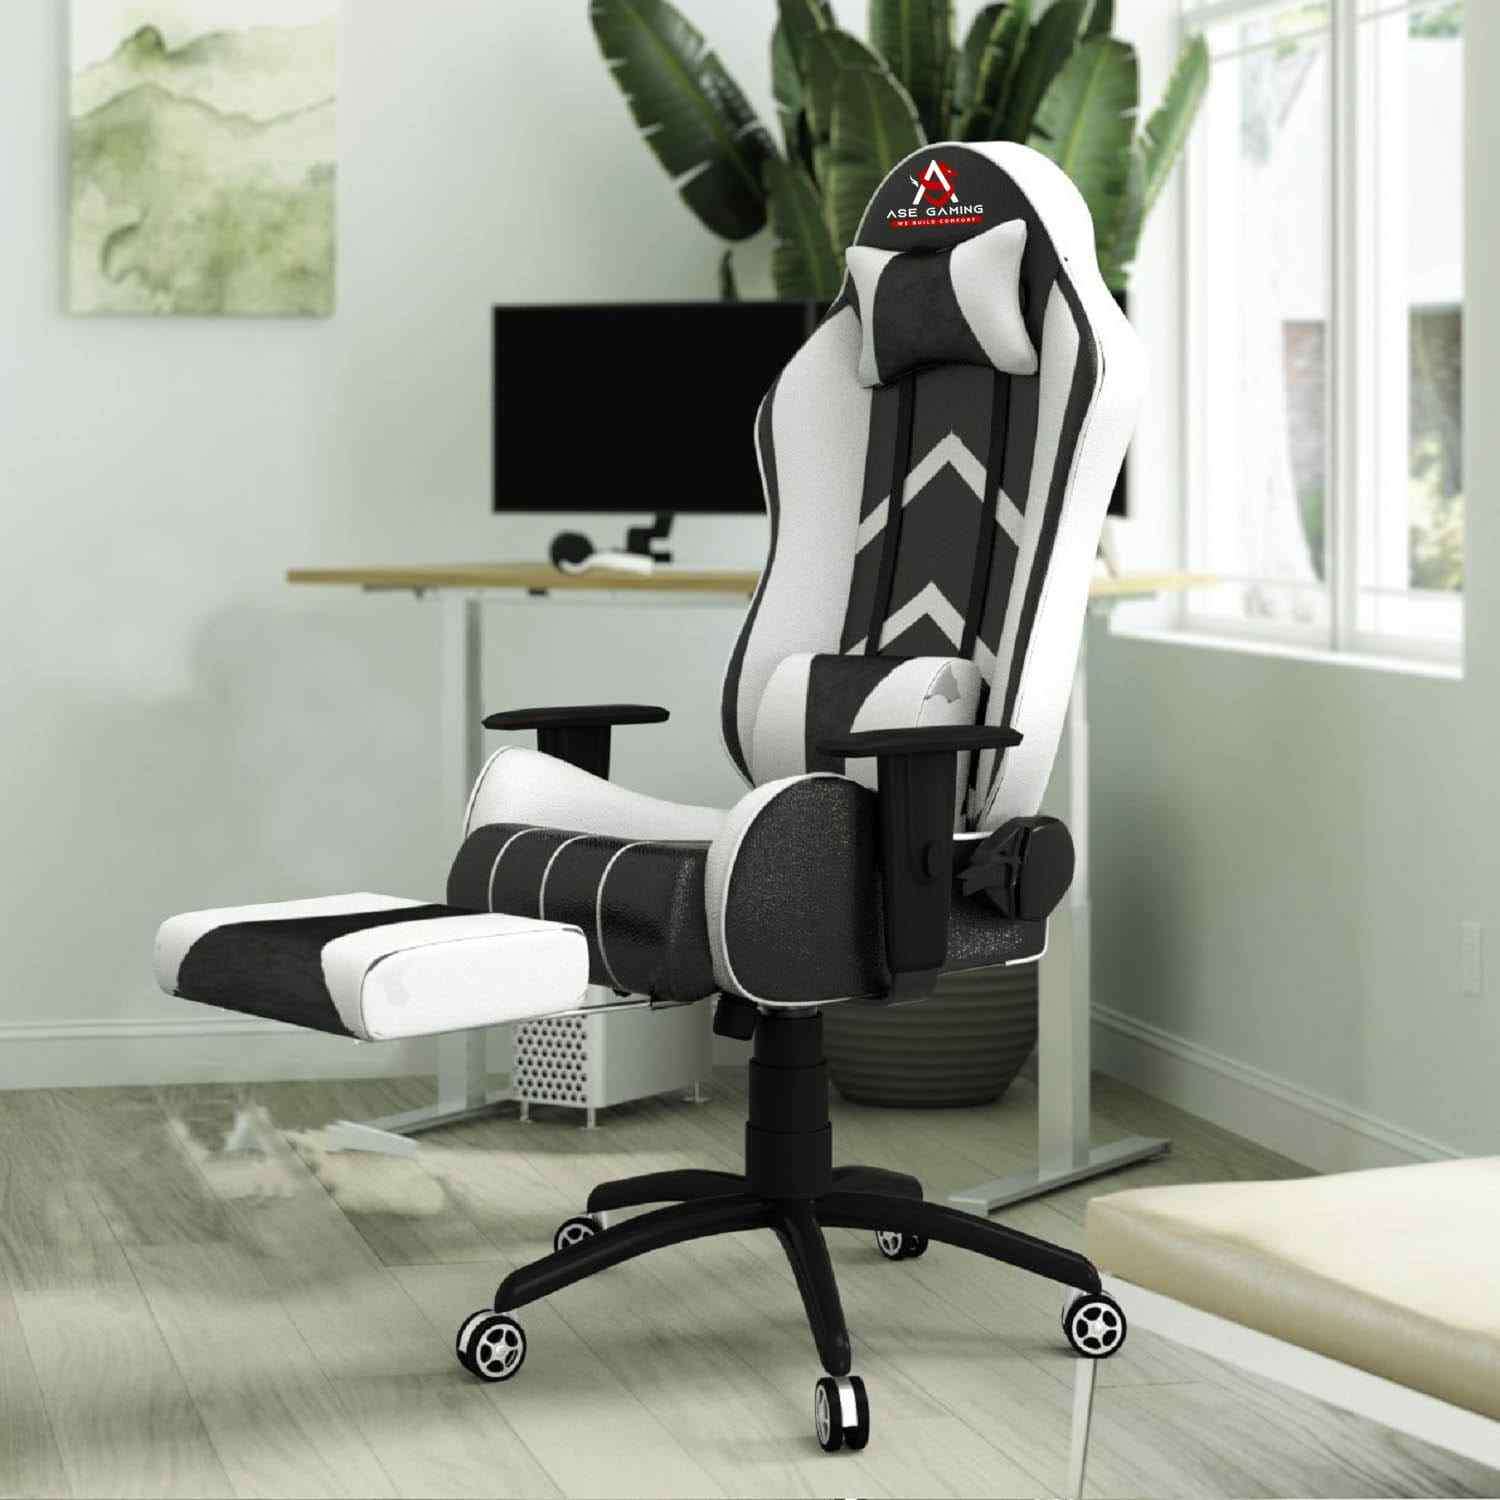 ASE Gaming Gold Series Gaming Chair With Footrest (Full Black)